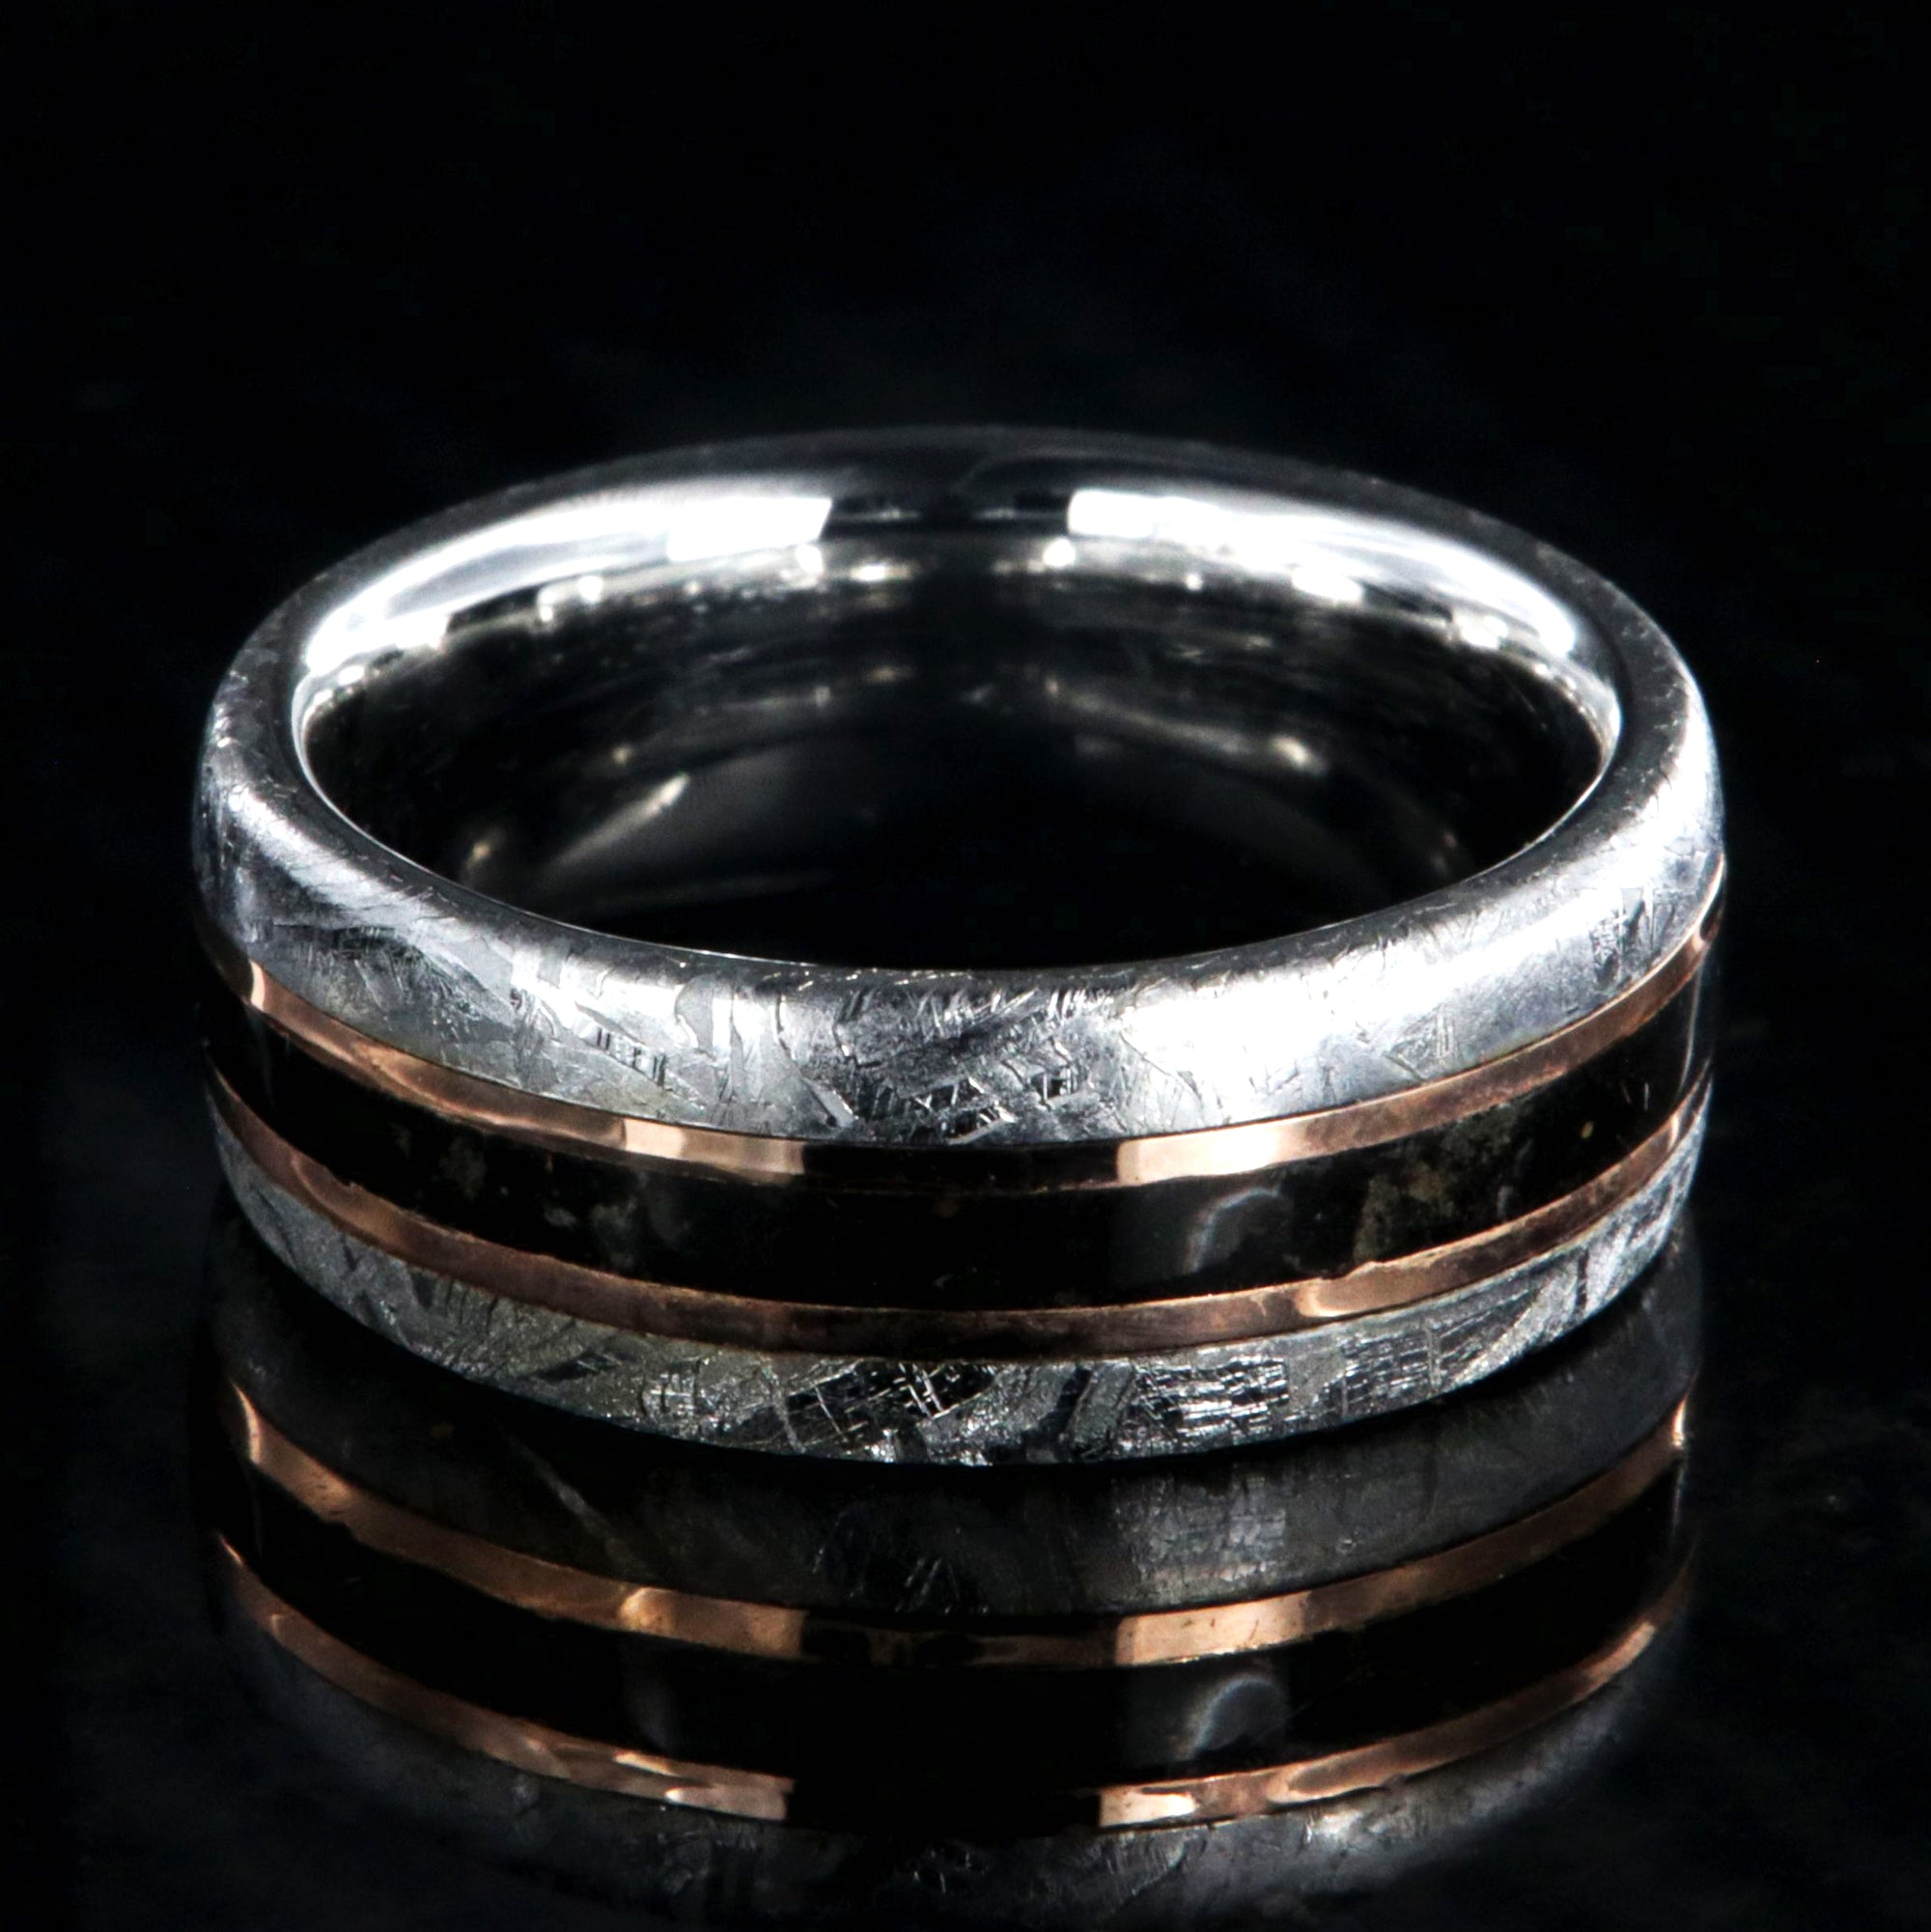 8mm wide men's wedding band with cobalt sleeve and meteorite edges, a dinosaur bone center inlay with rose gold inlays on either side